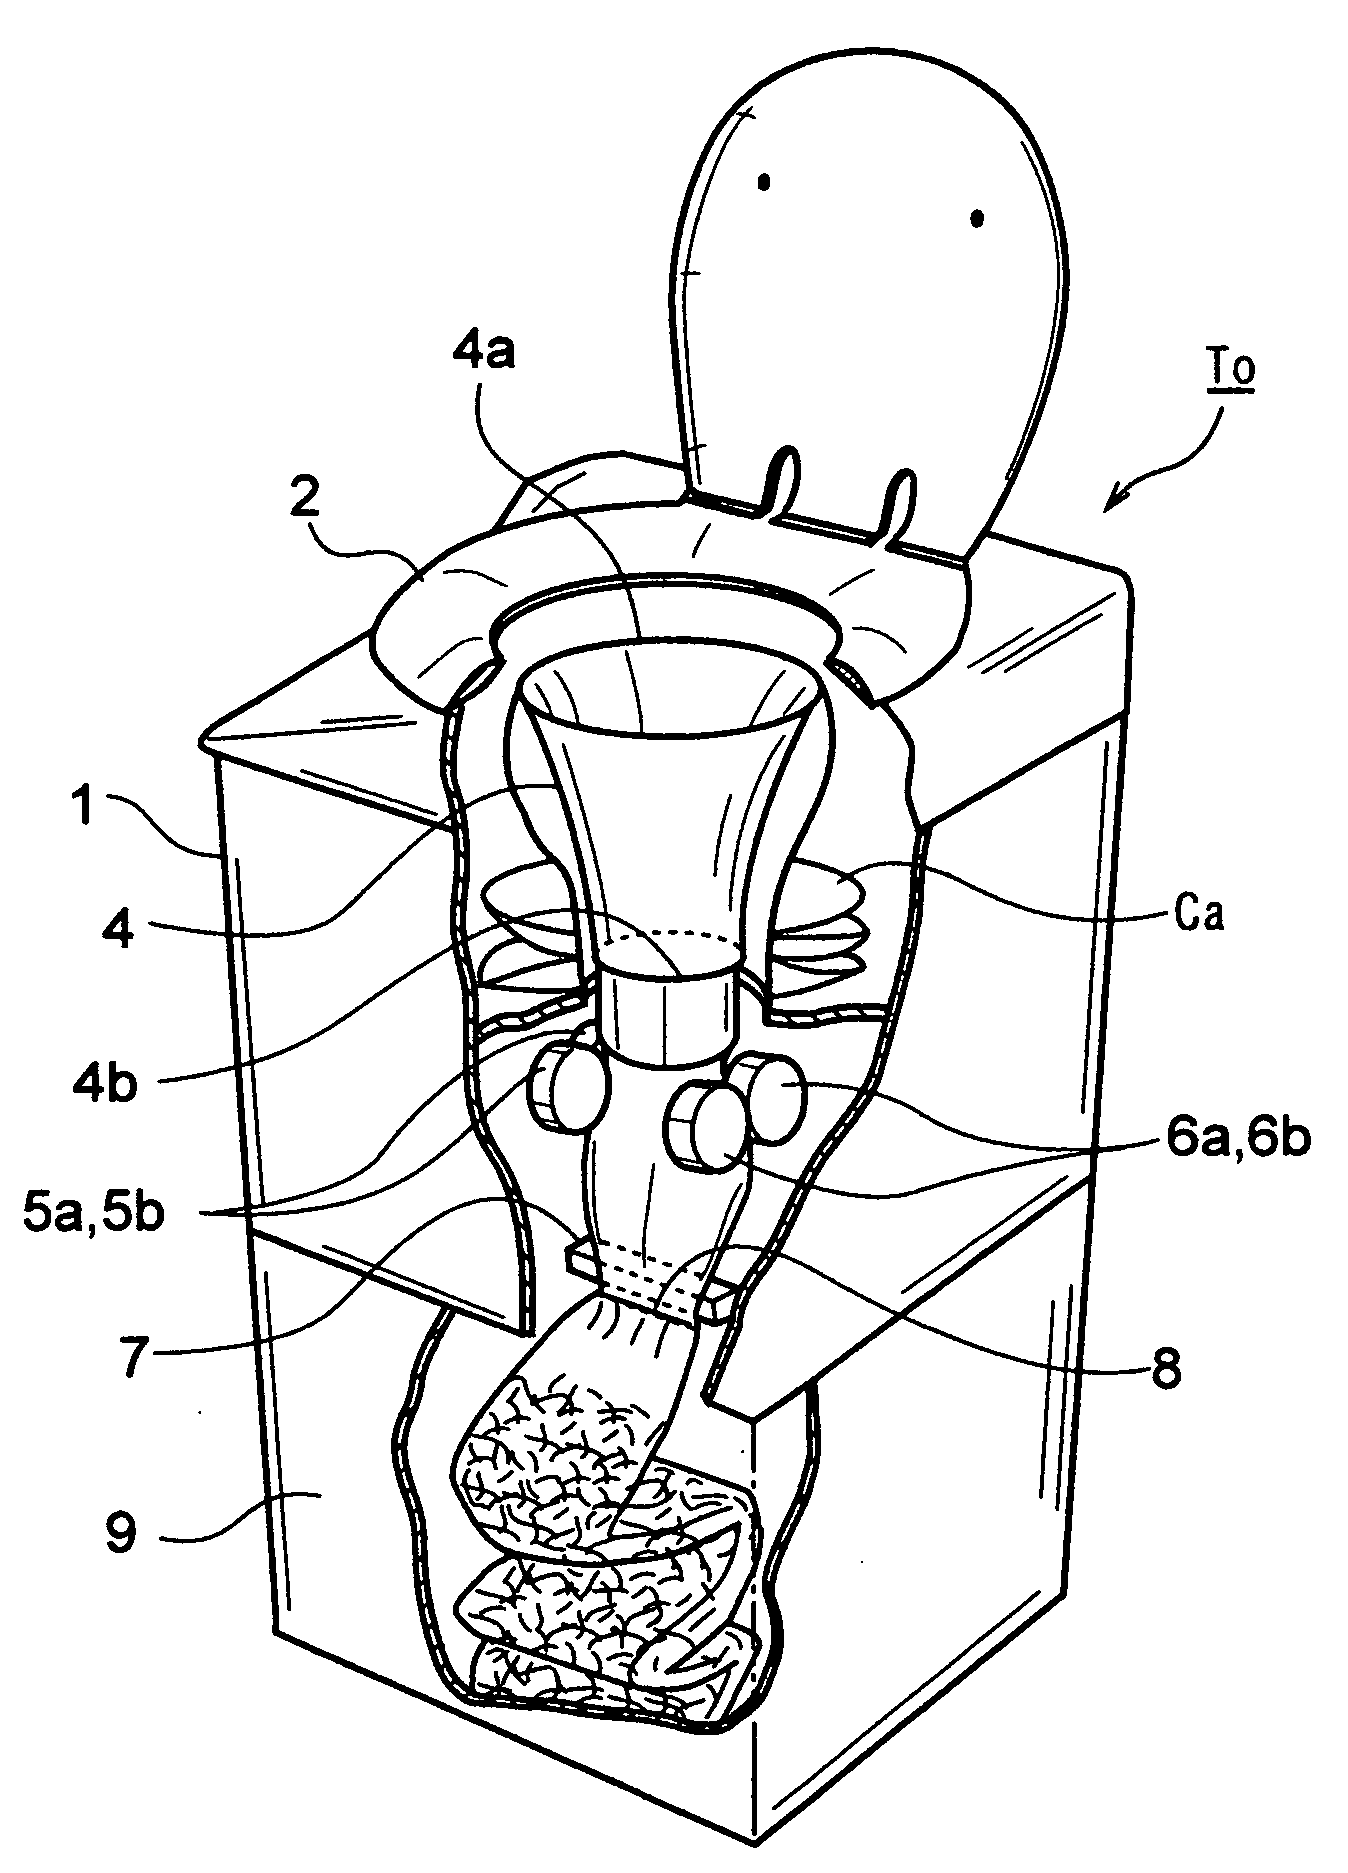 Toilet apparatus with processing material